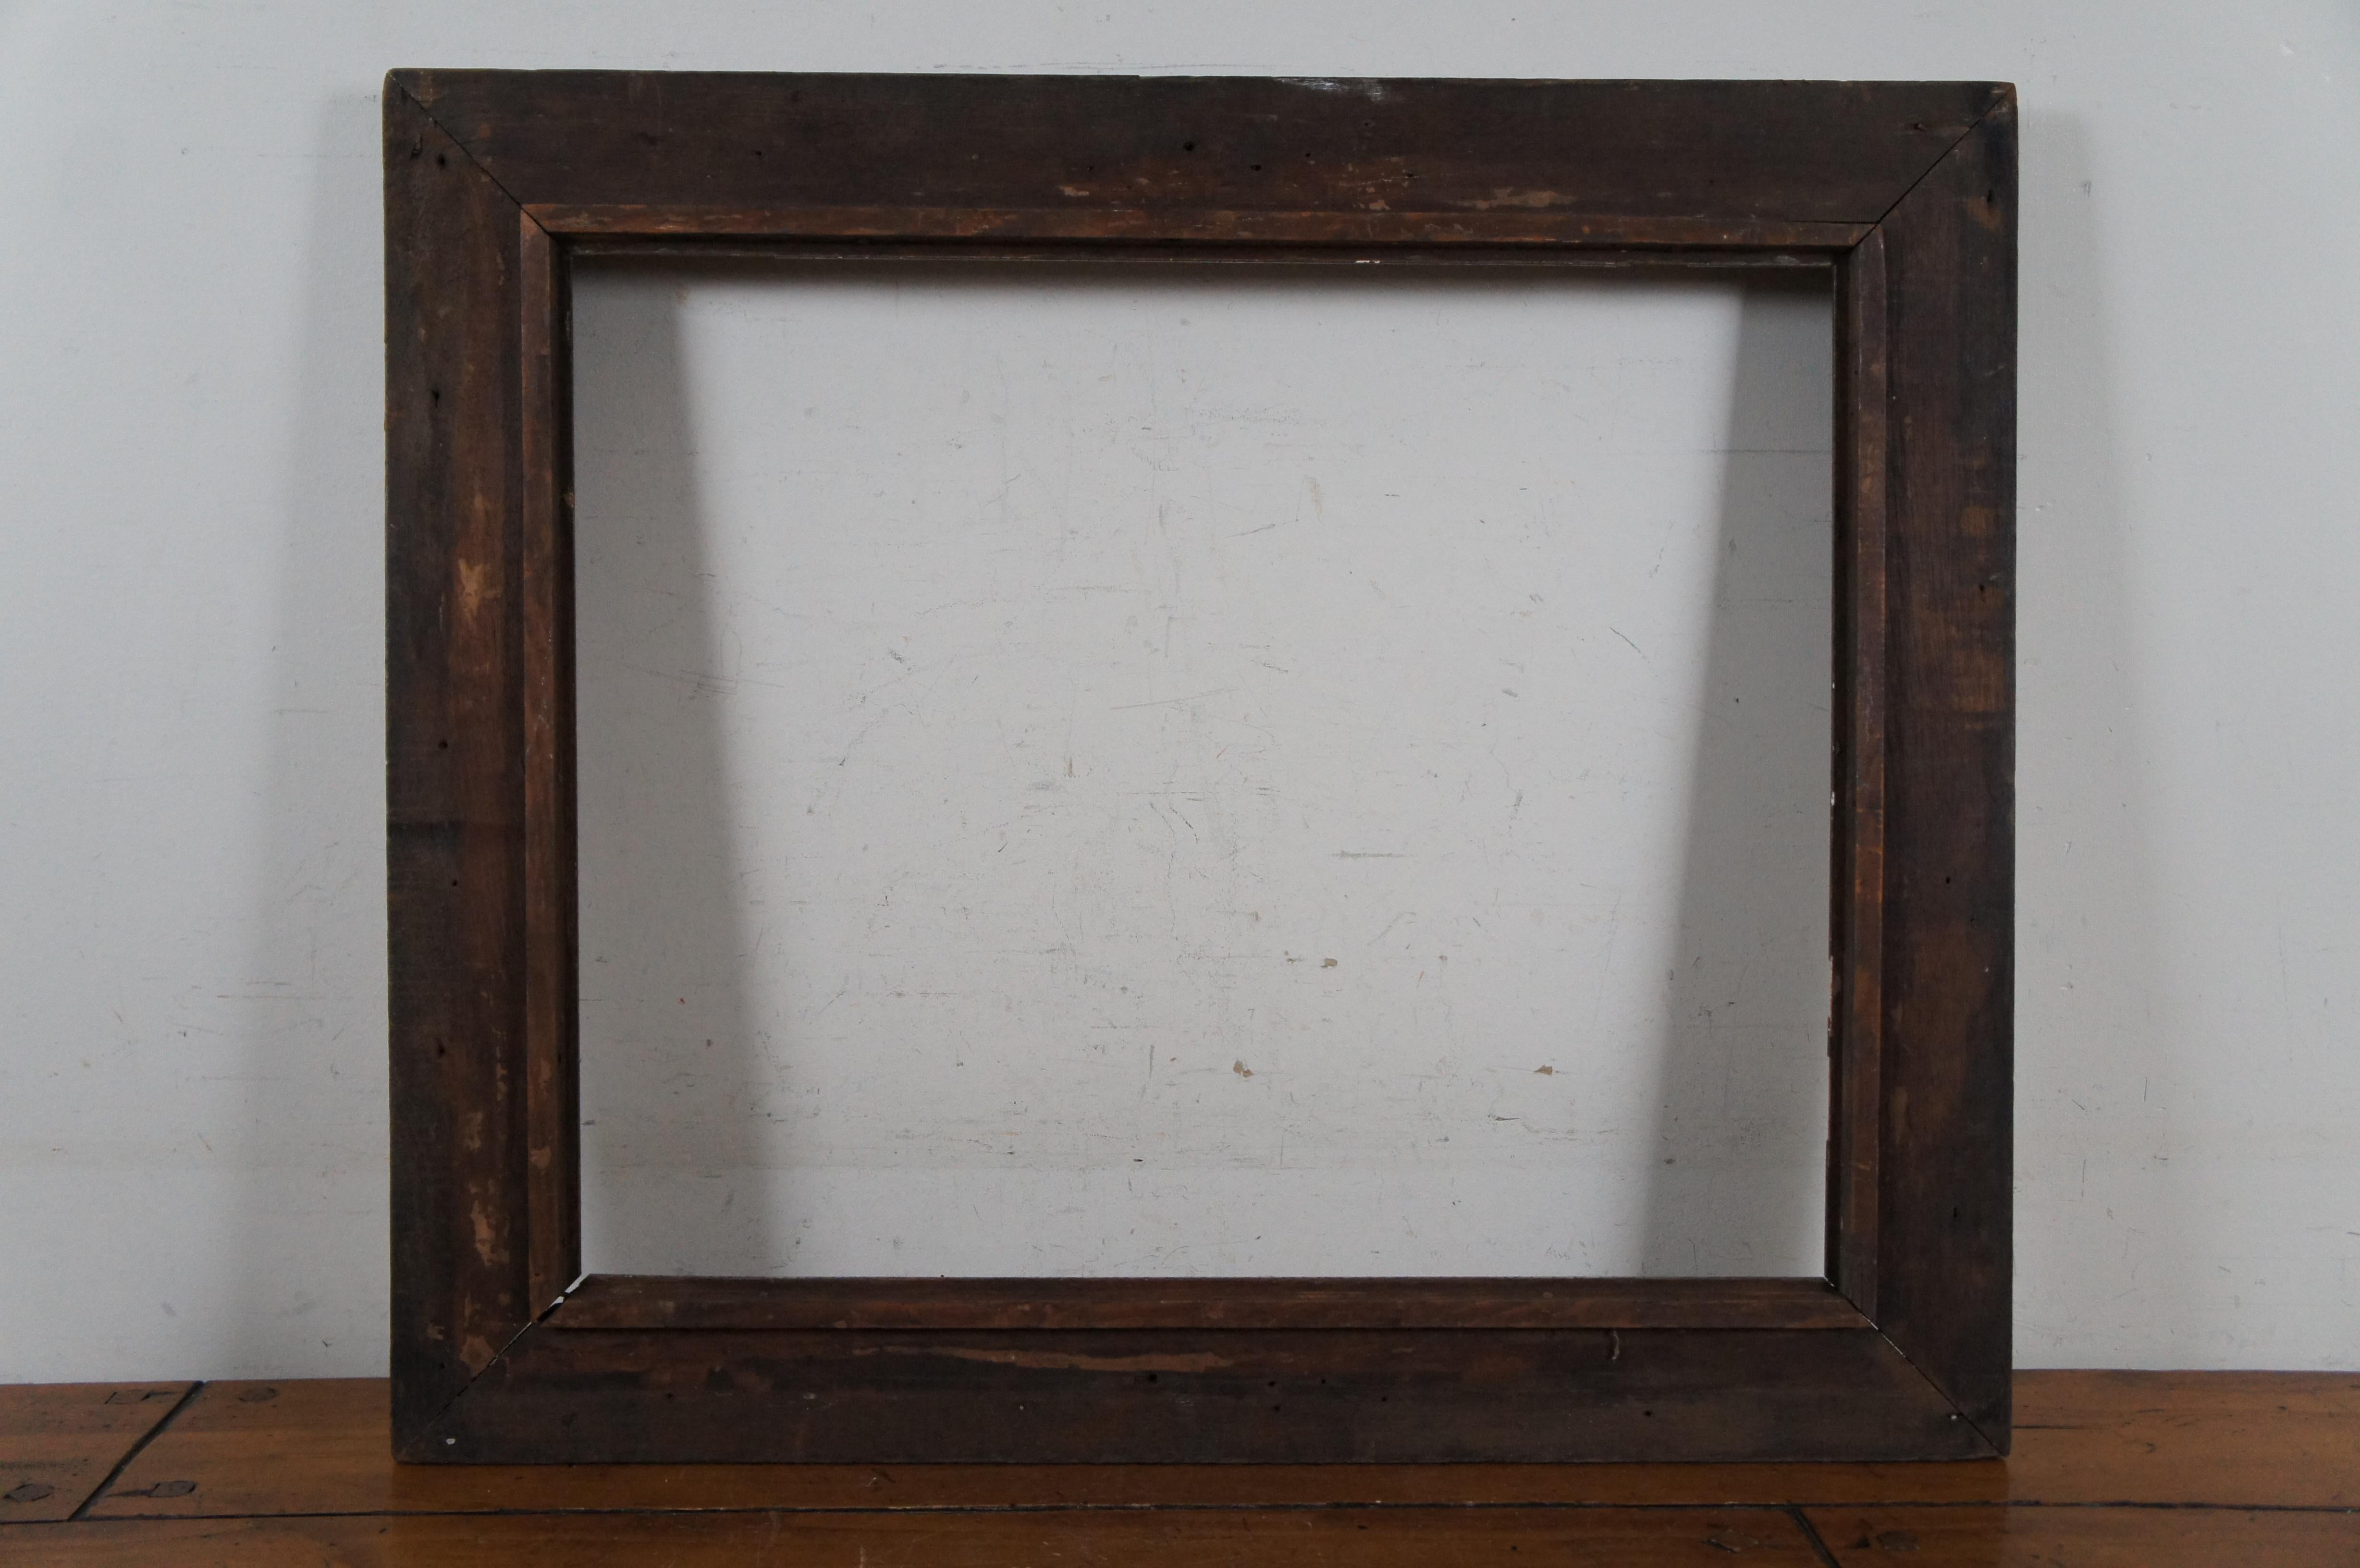 Traditional Mahogany Beveled Picture Mirror Frame Gilt Trim Fits 21.75 x 17.75